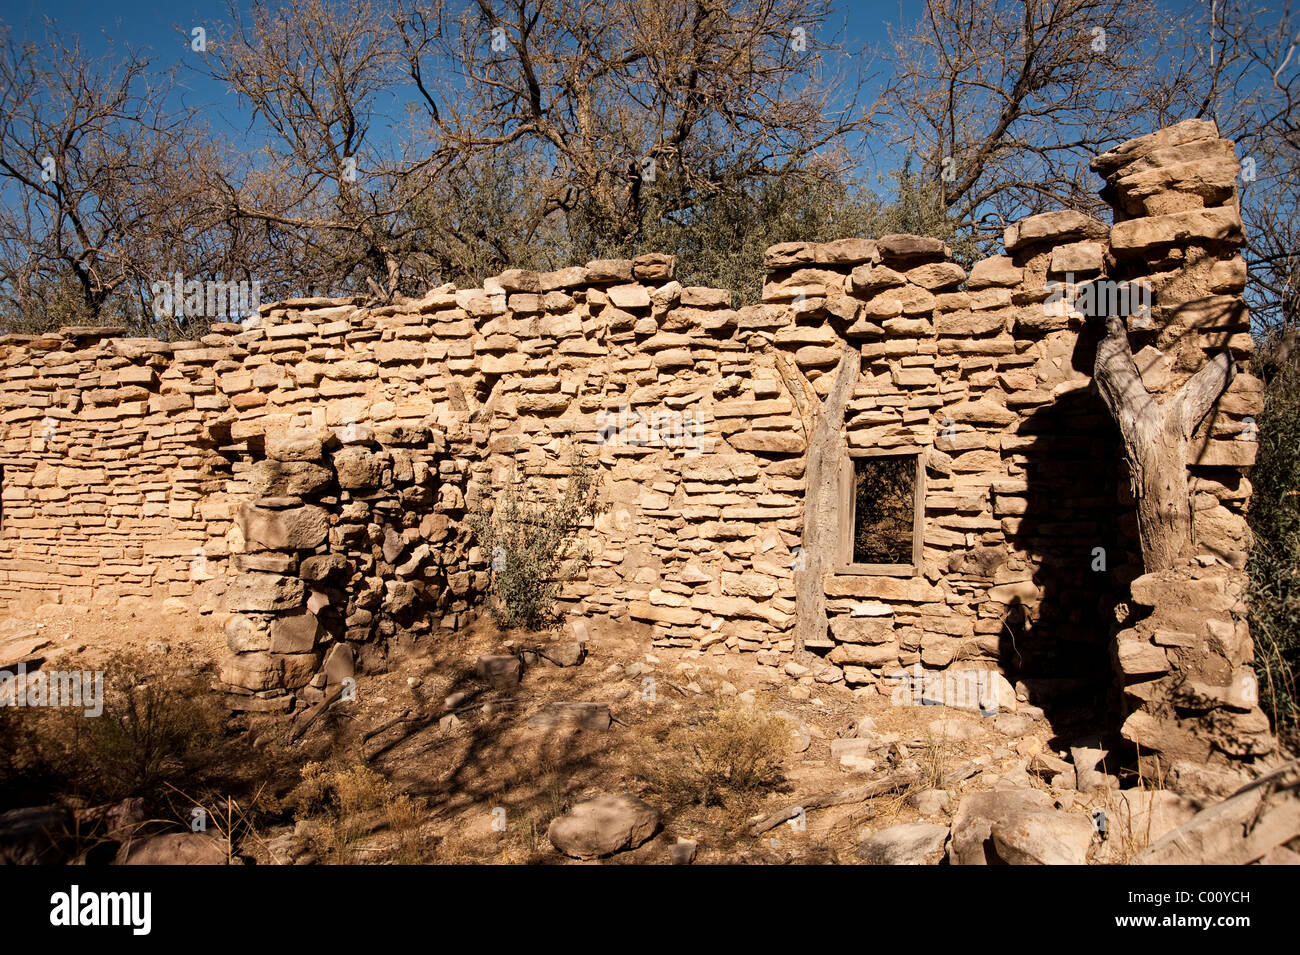 Bannack Trencher Indians dwelling in Southern Arizona built dwellings which included natural structures in the construction. Stock Photo